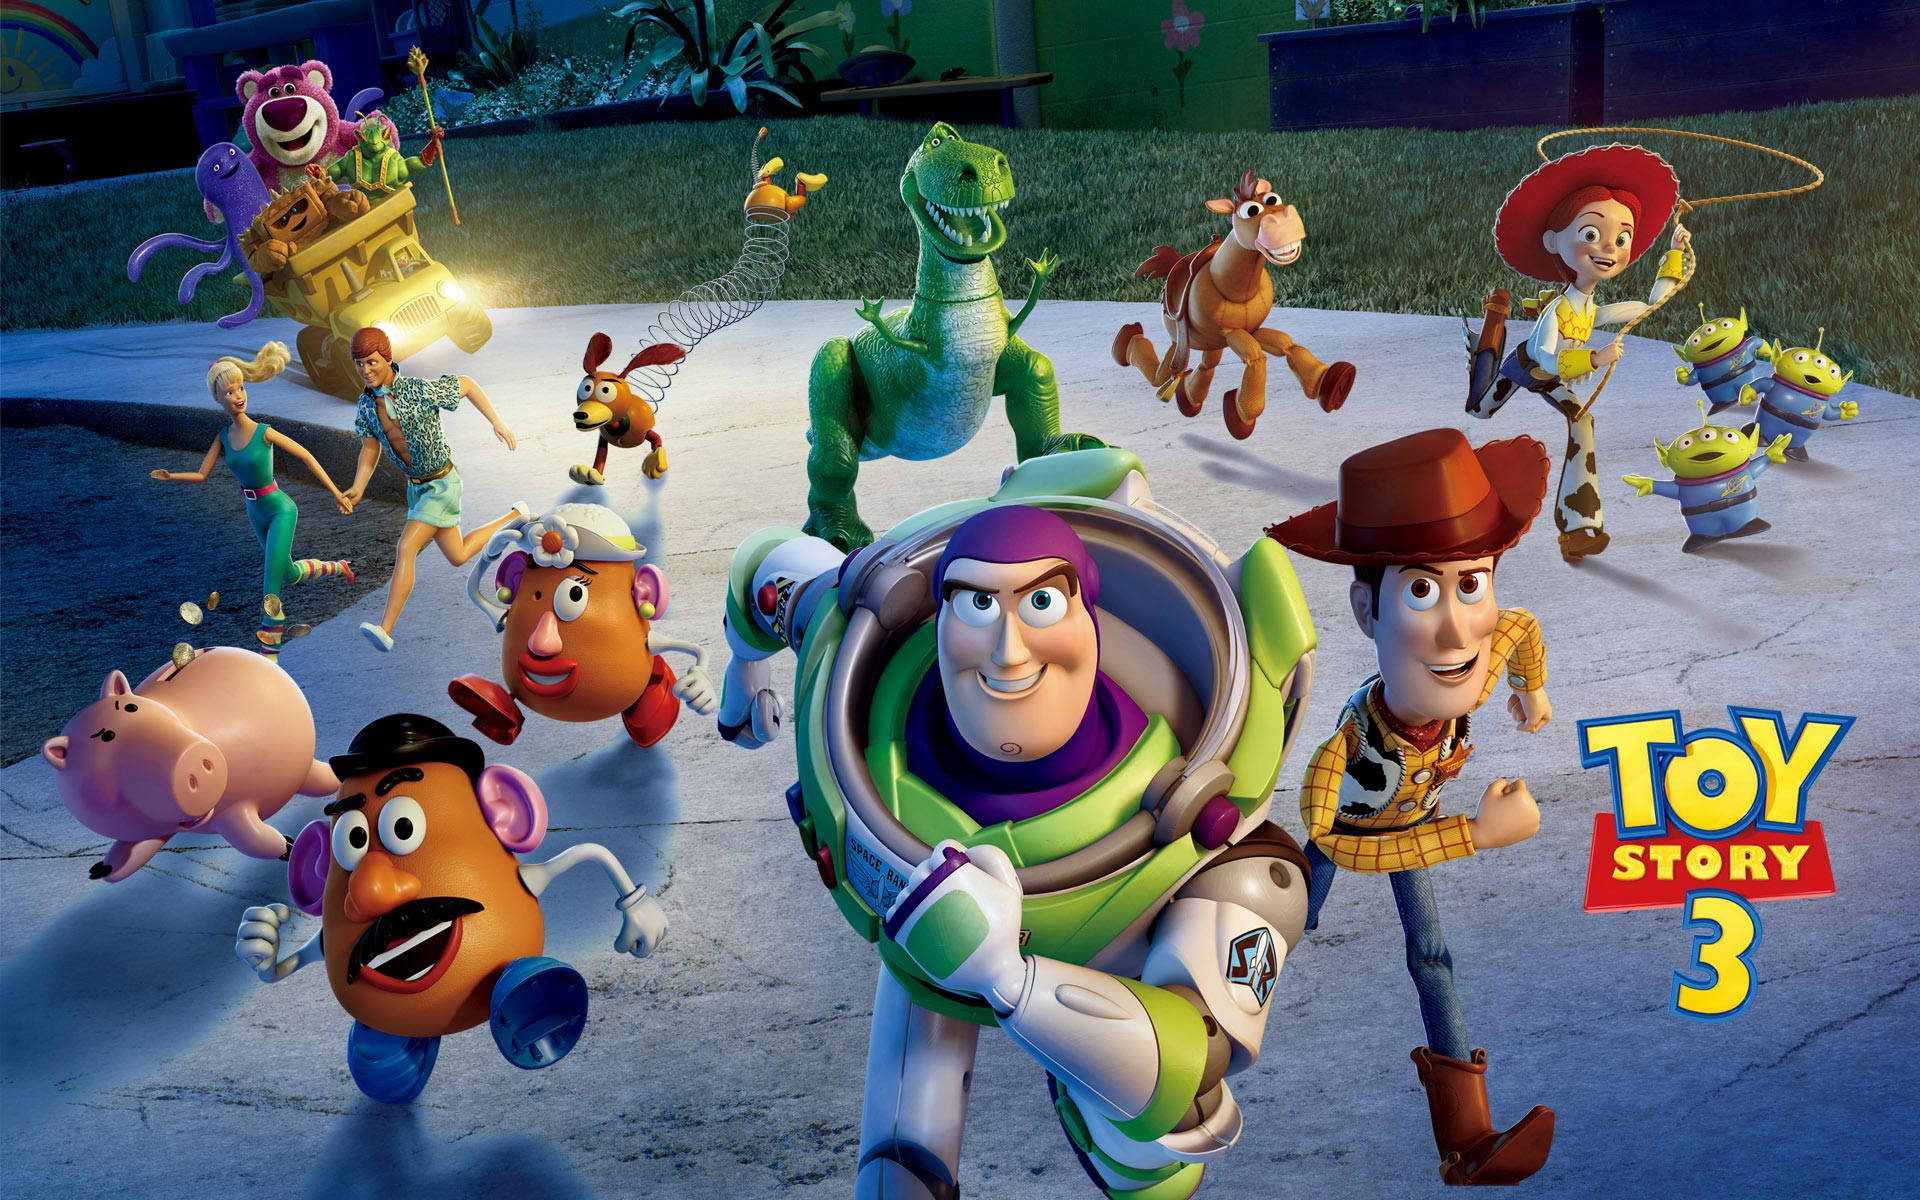 DISNEY/PIXAR TOY STORY 3 POSTER - Cast Of Characters With Their